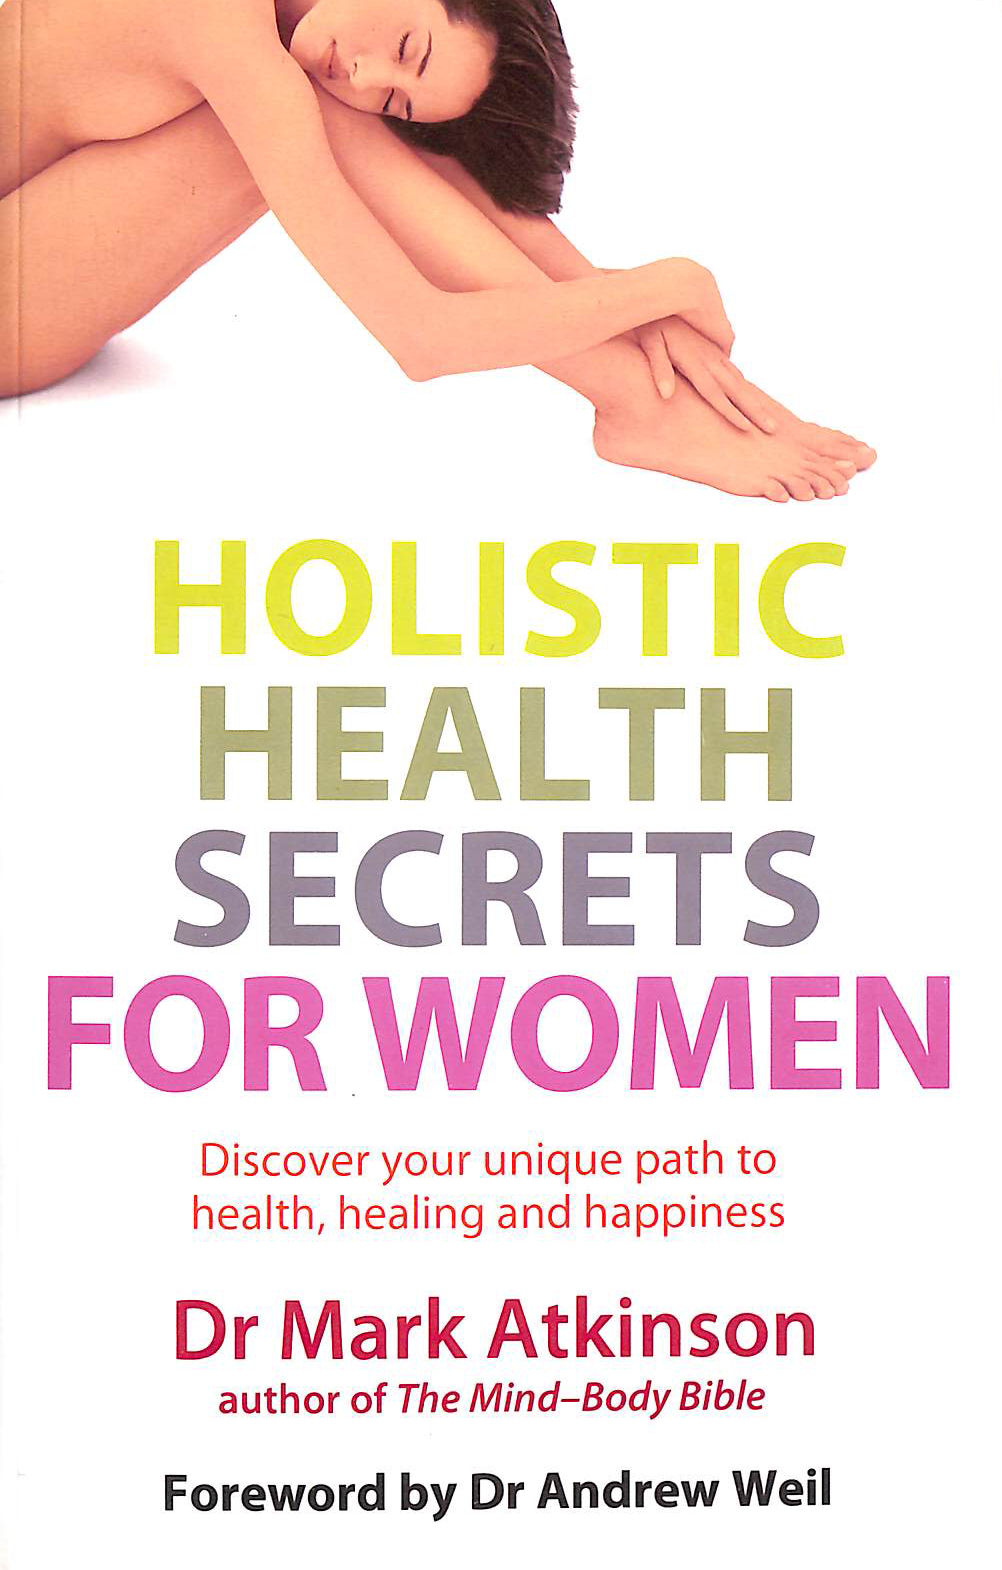 MARK ATKINSON - Holistic Health Secrets For Women: Discover Your Unique Path To Health, Healing And Happiness